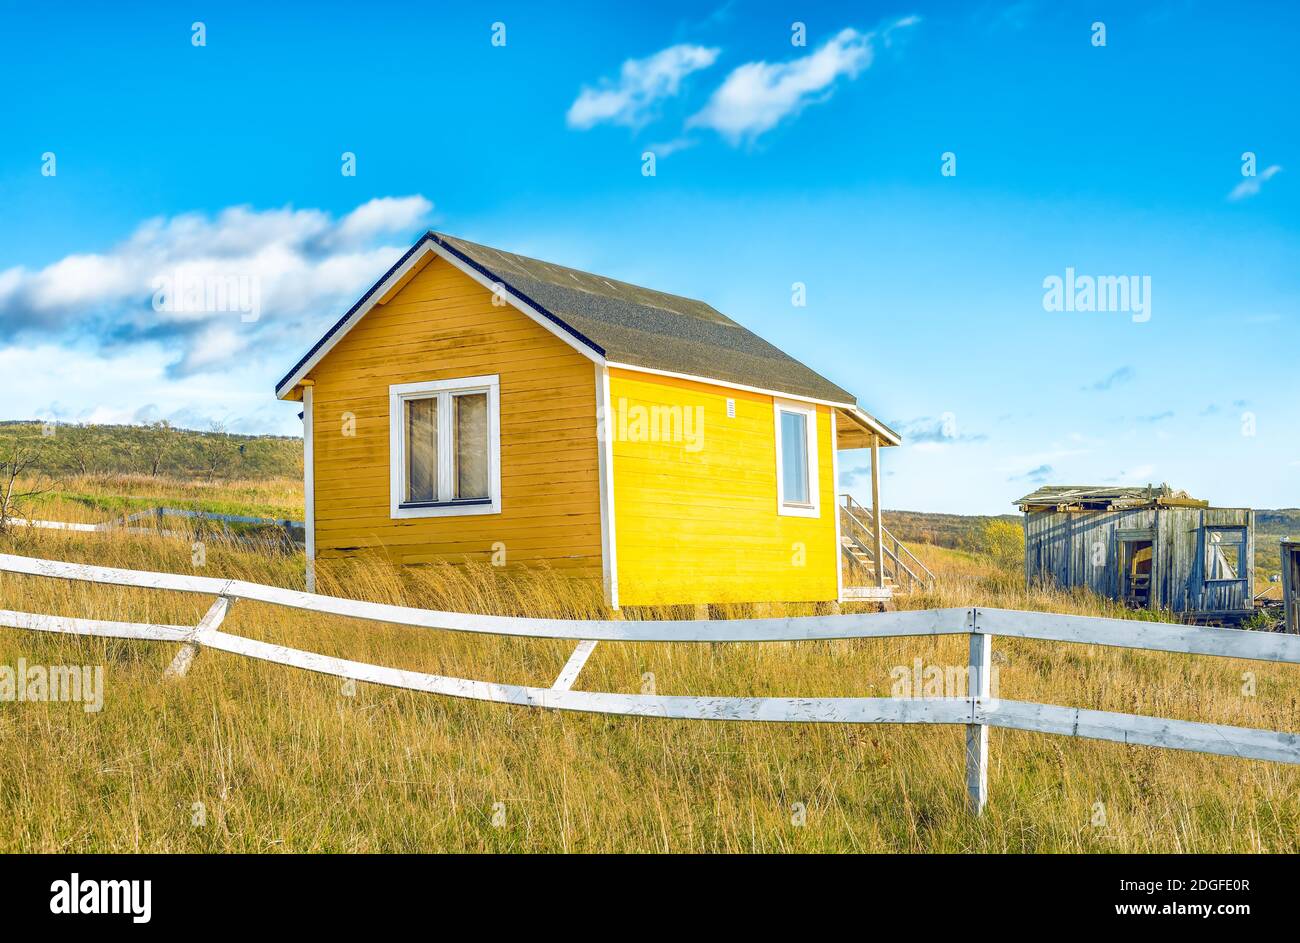 Abandoned yellow small house with white fence in countryside Stock Photo